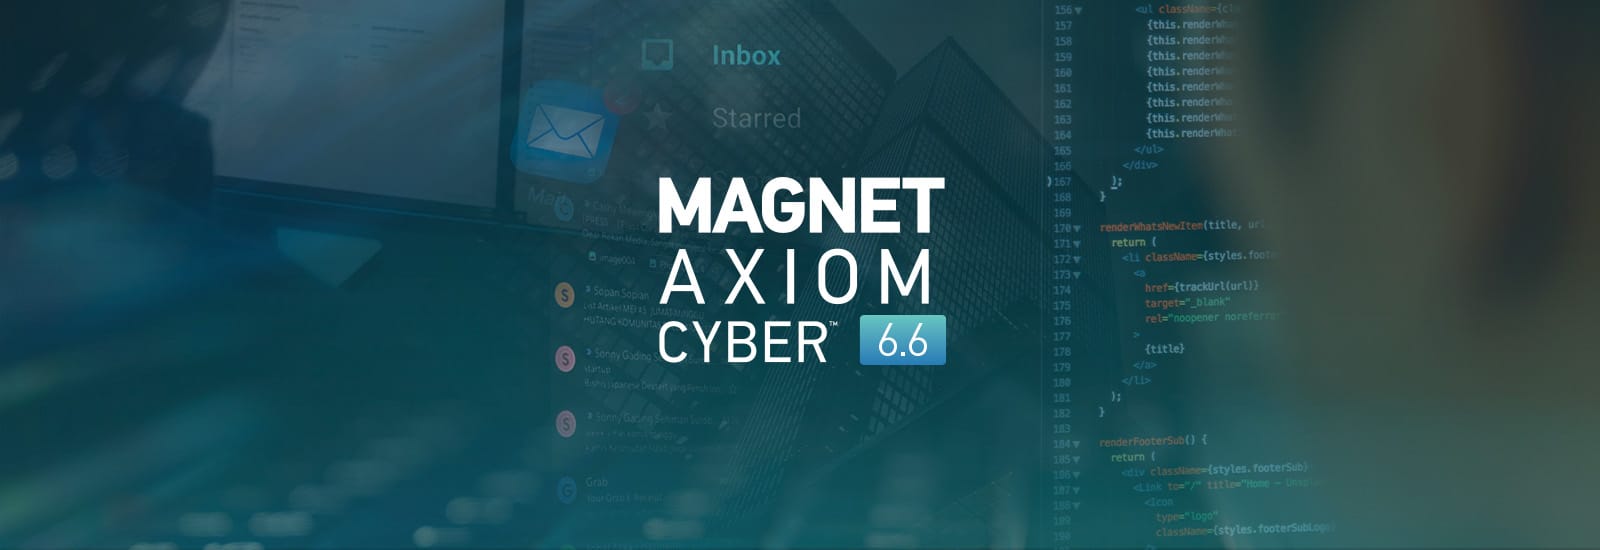 A decorative header for the Magnet AXIOM Cyber 6.6 release